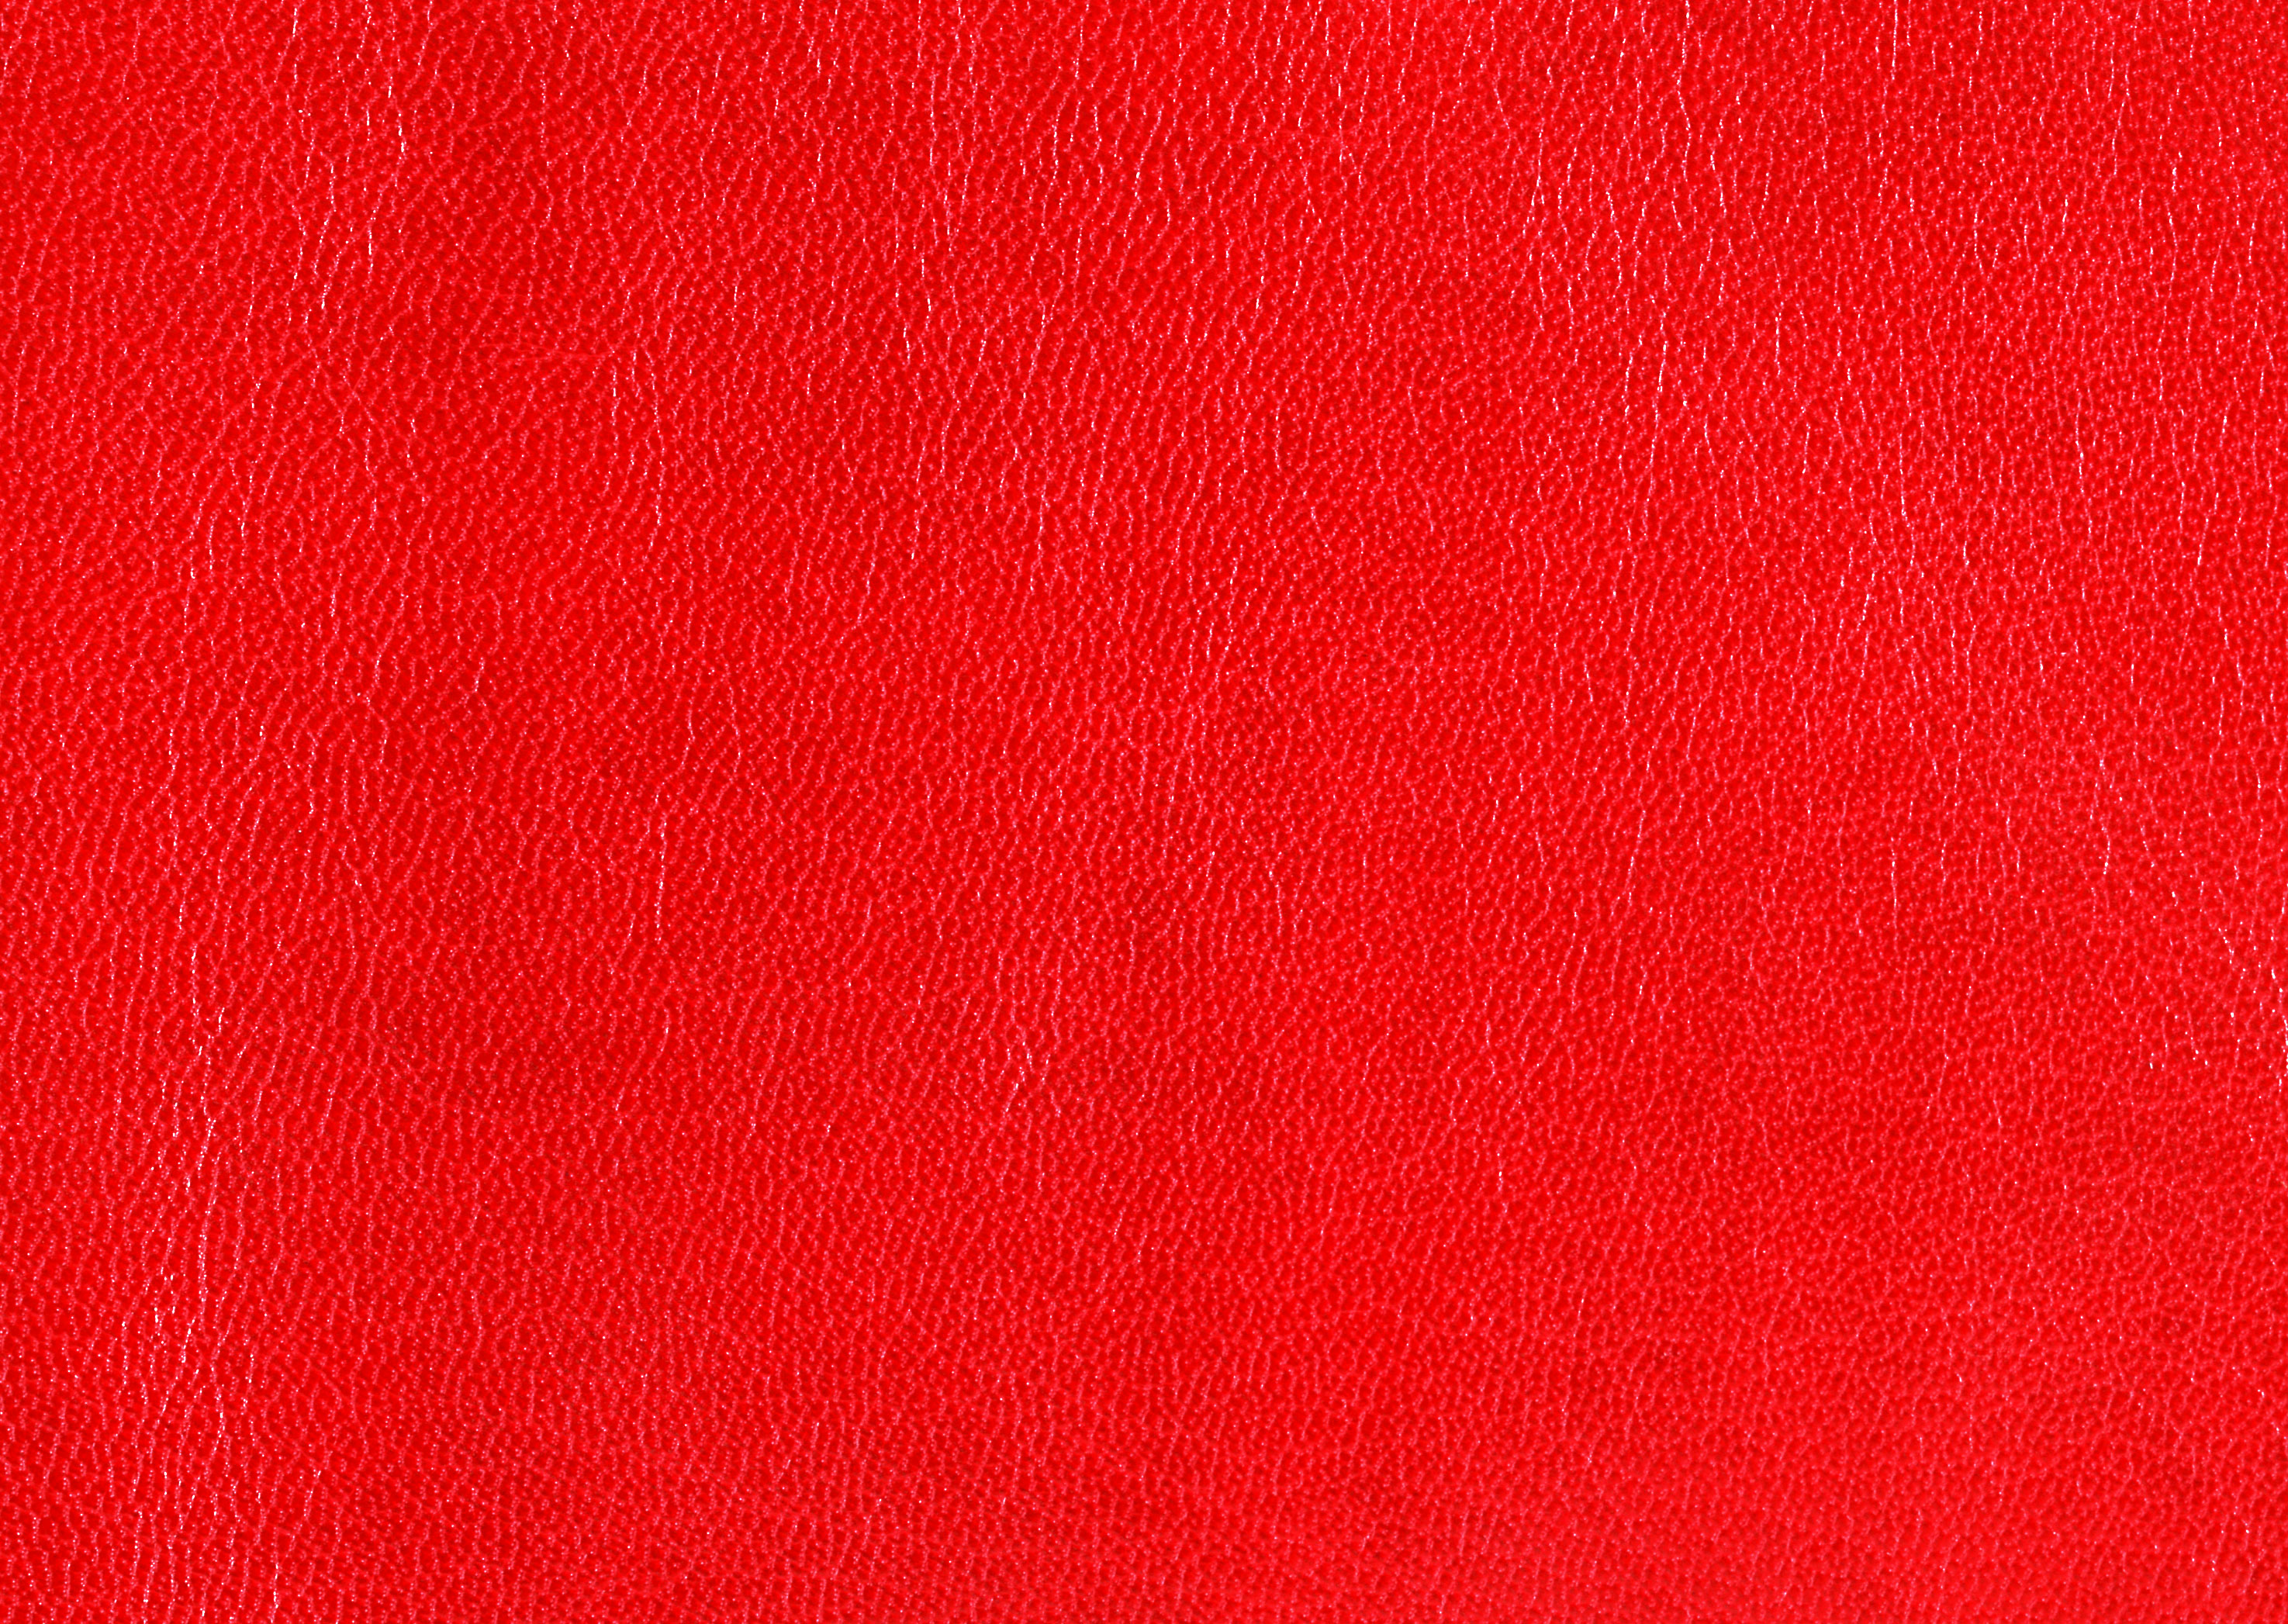 Red Leather Texture Red leather texture background